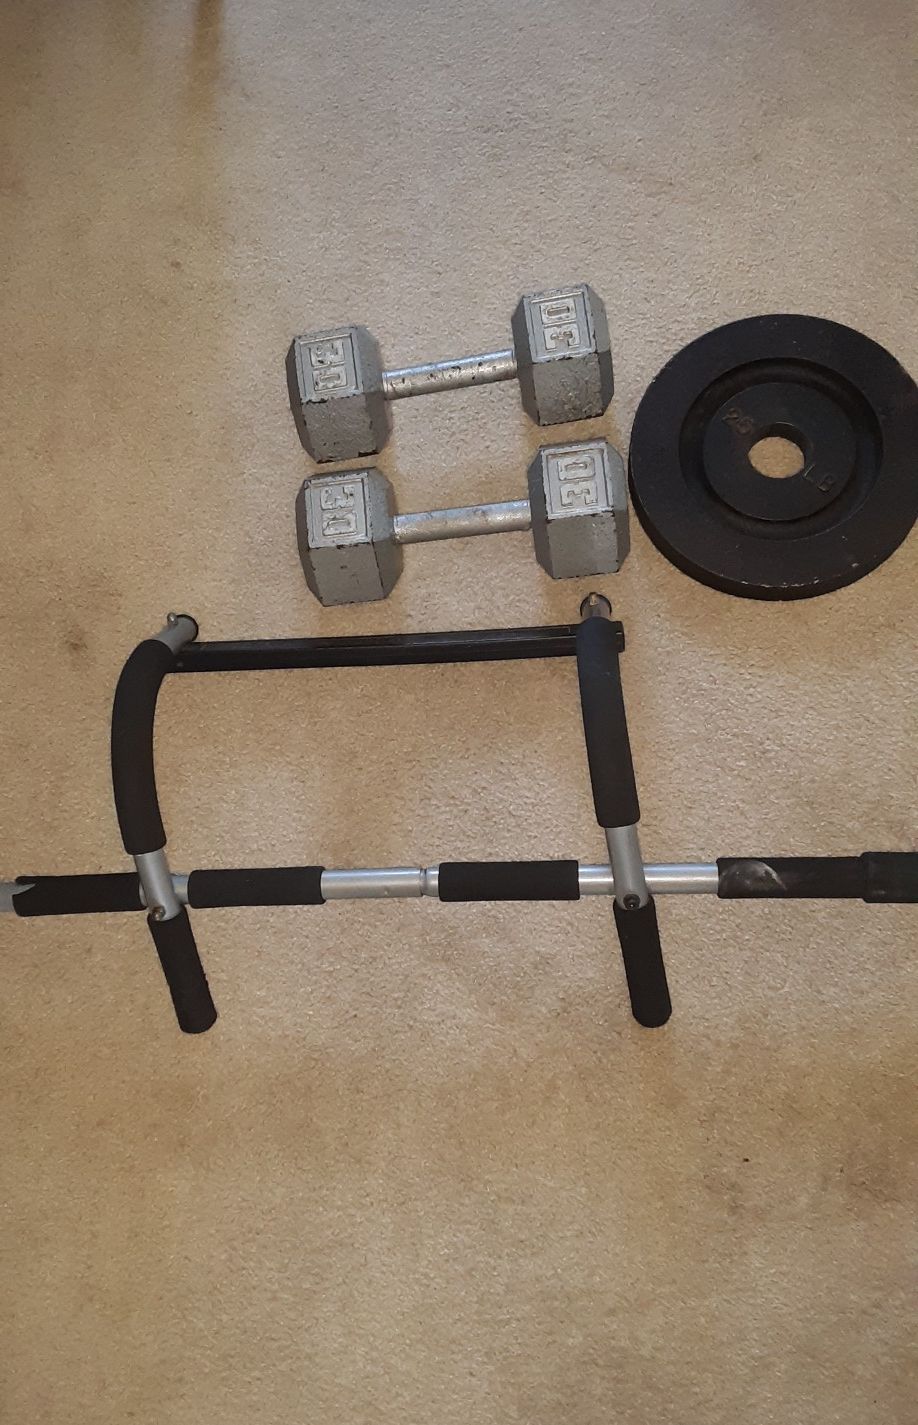 30LBS BARBELL, 25LBS PLATE, PULL UP BAR